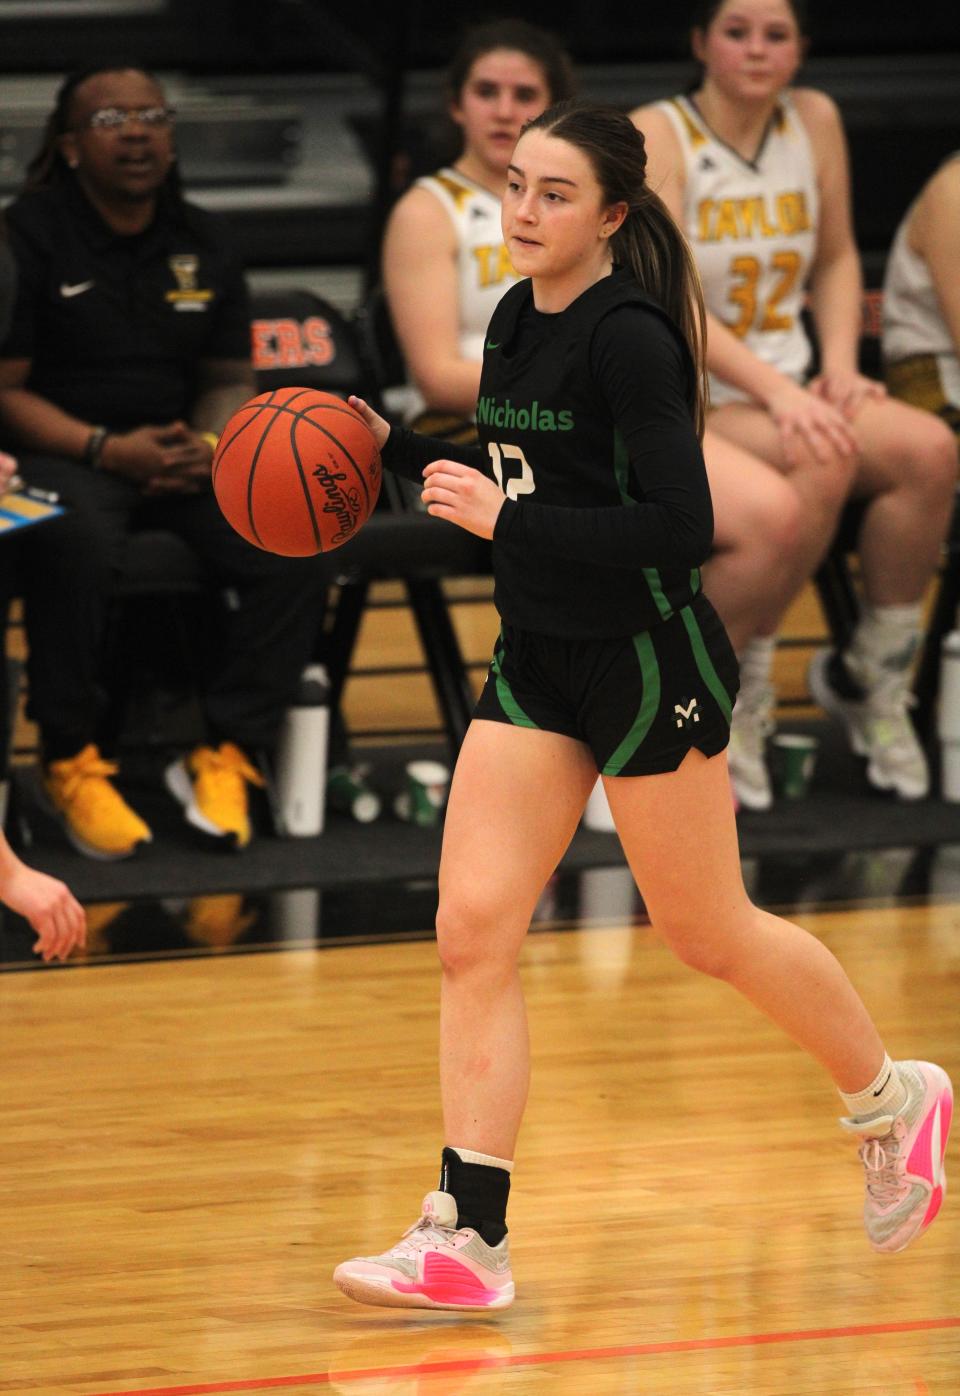 McNicholas junior Mia Nienaber was named to the Southwest District Division II third team.